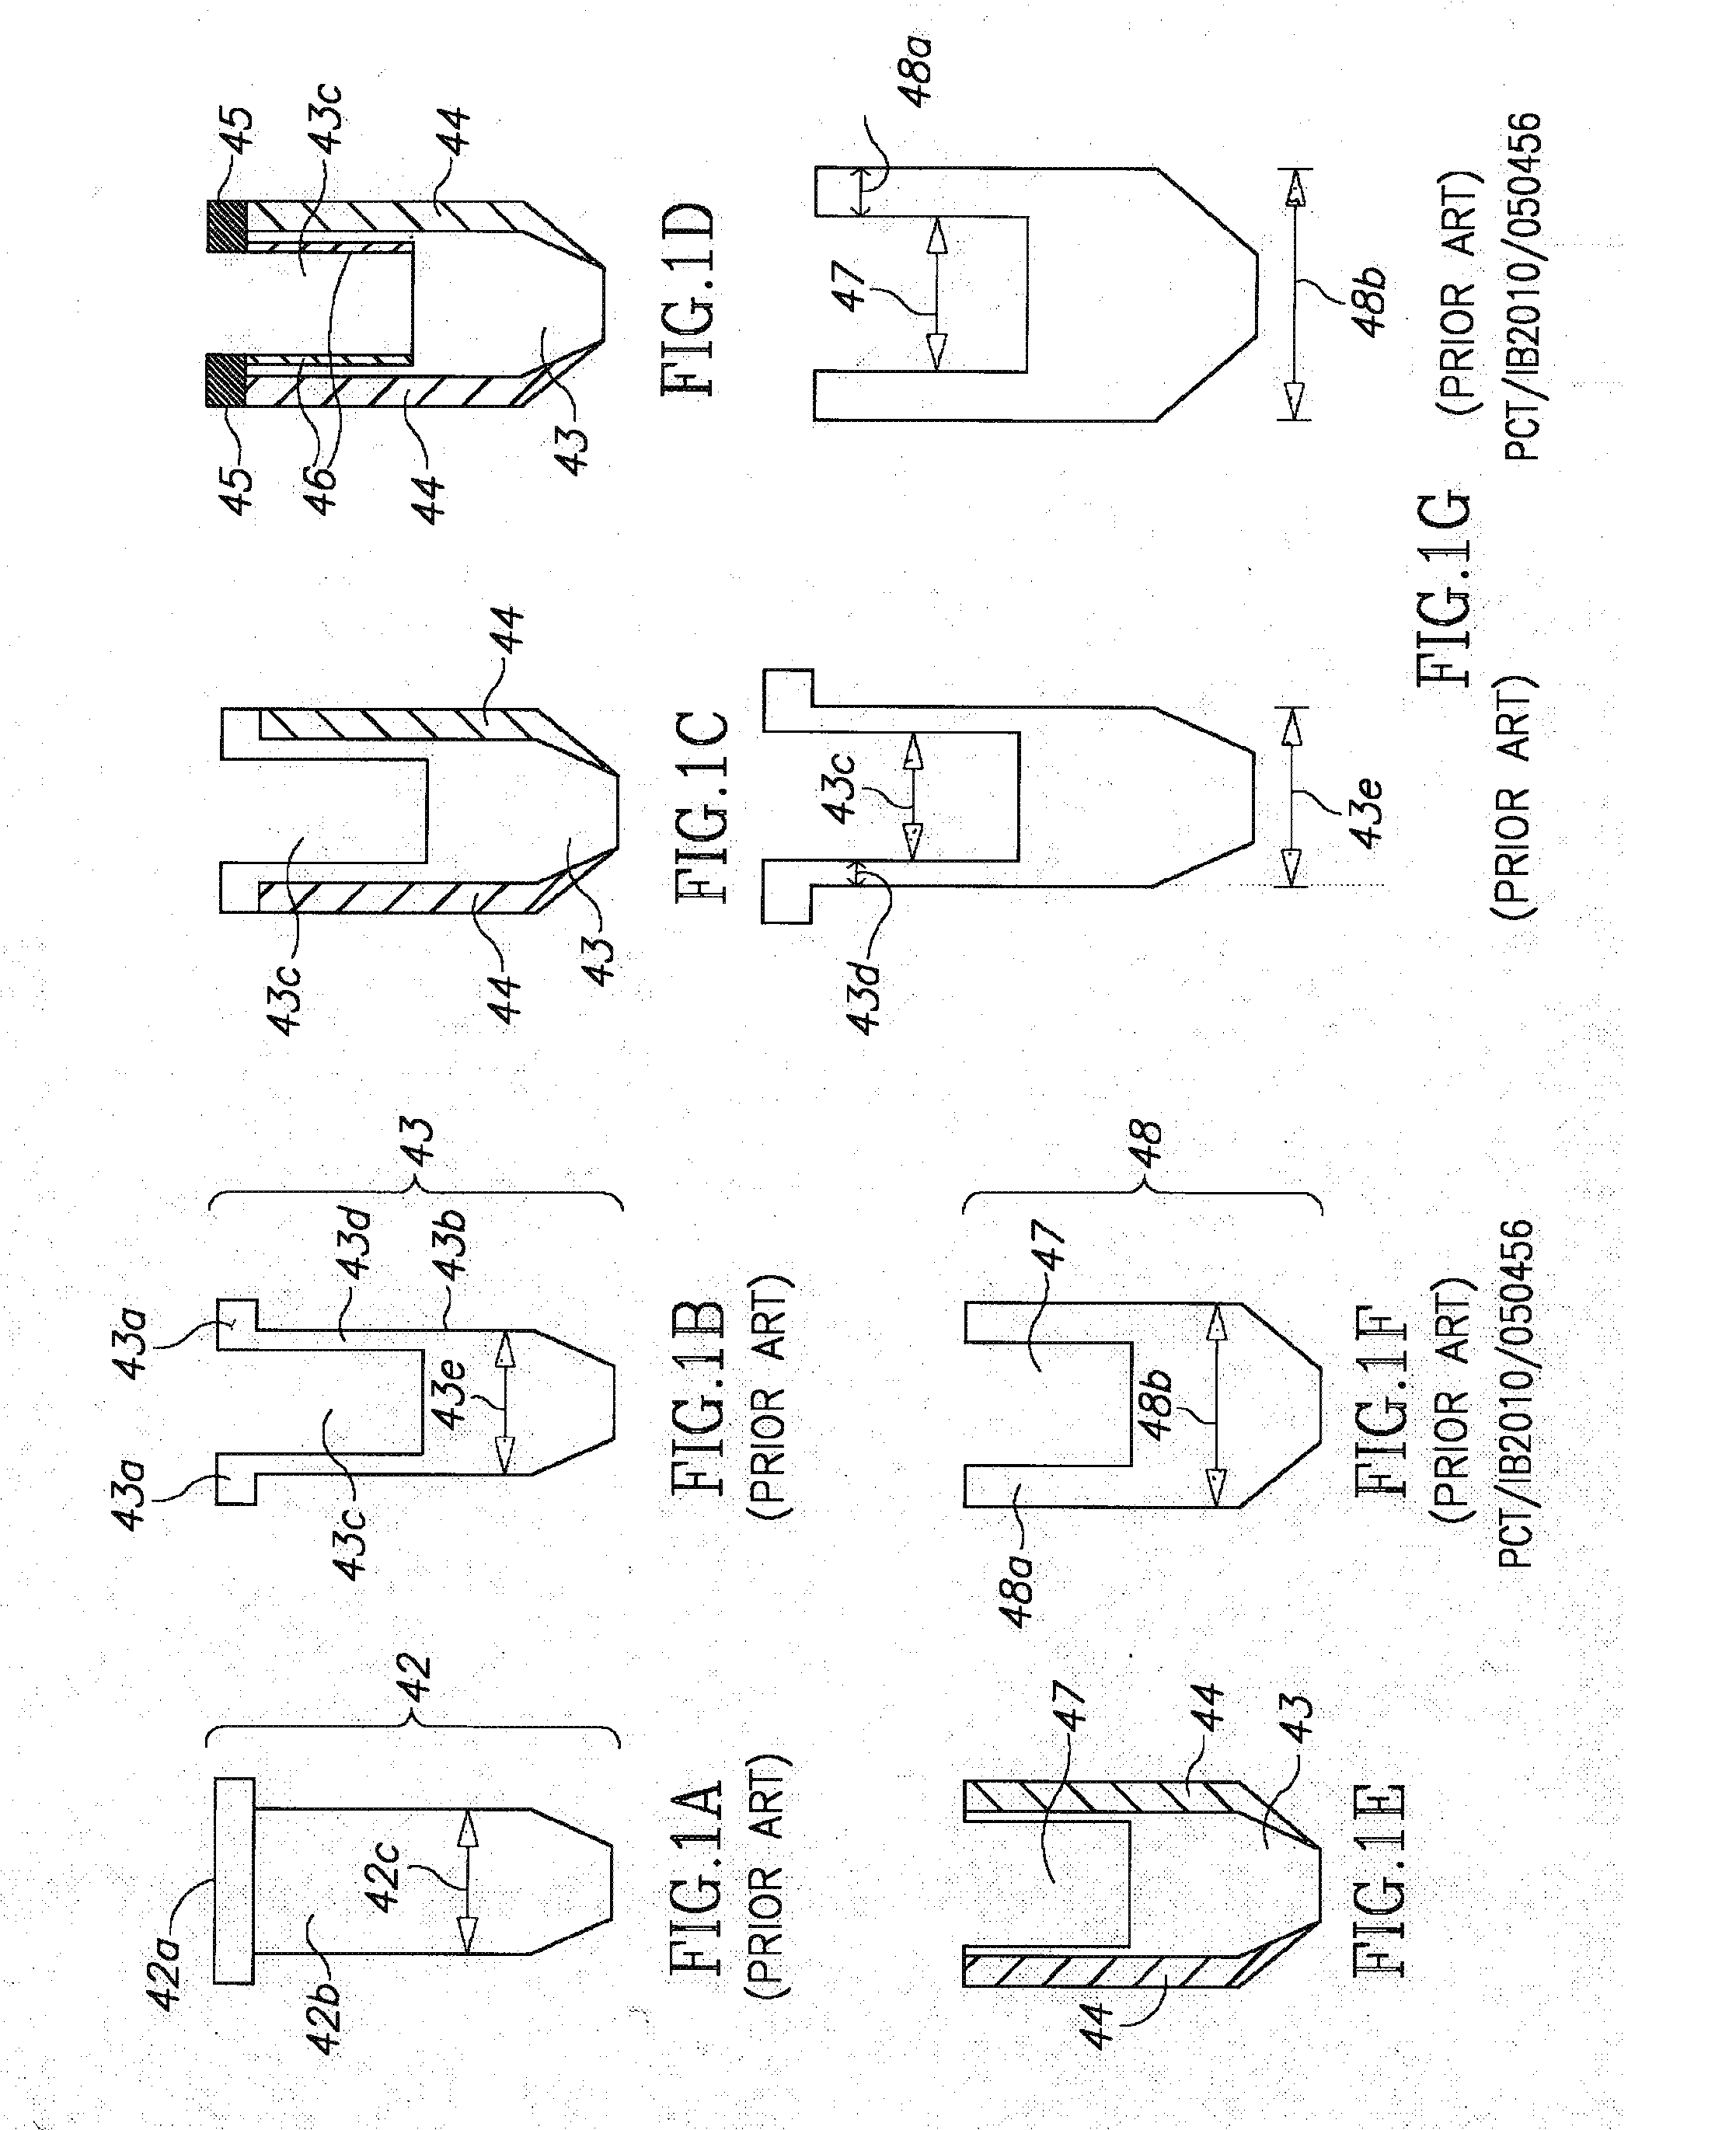 System, apparatus and method for implementing implants